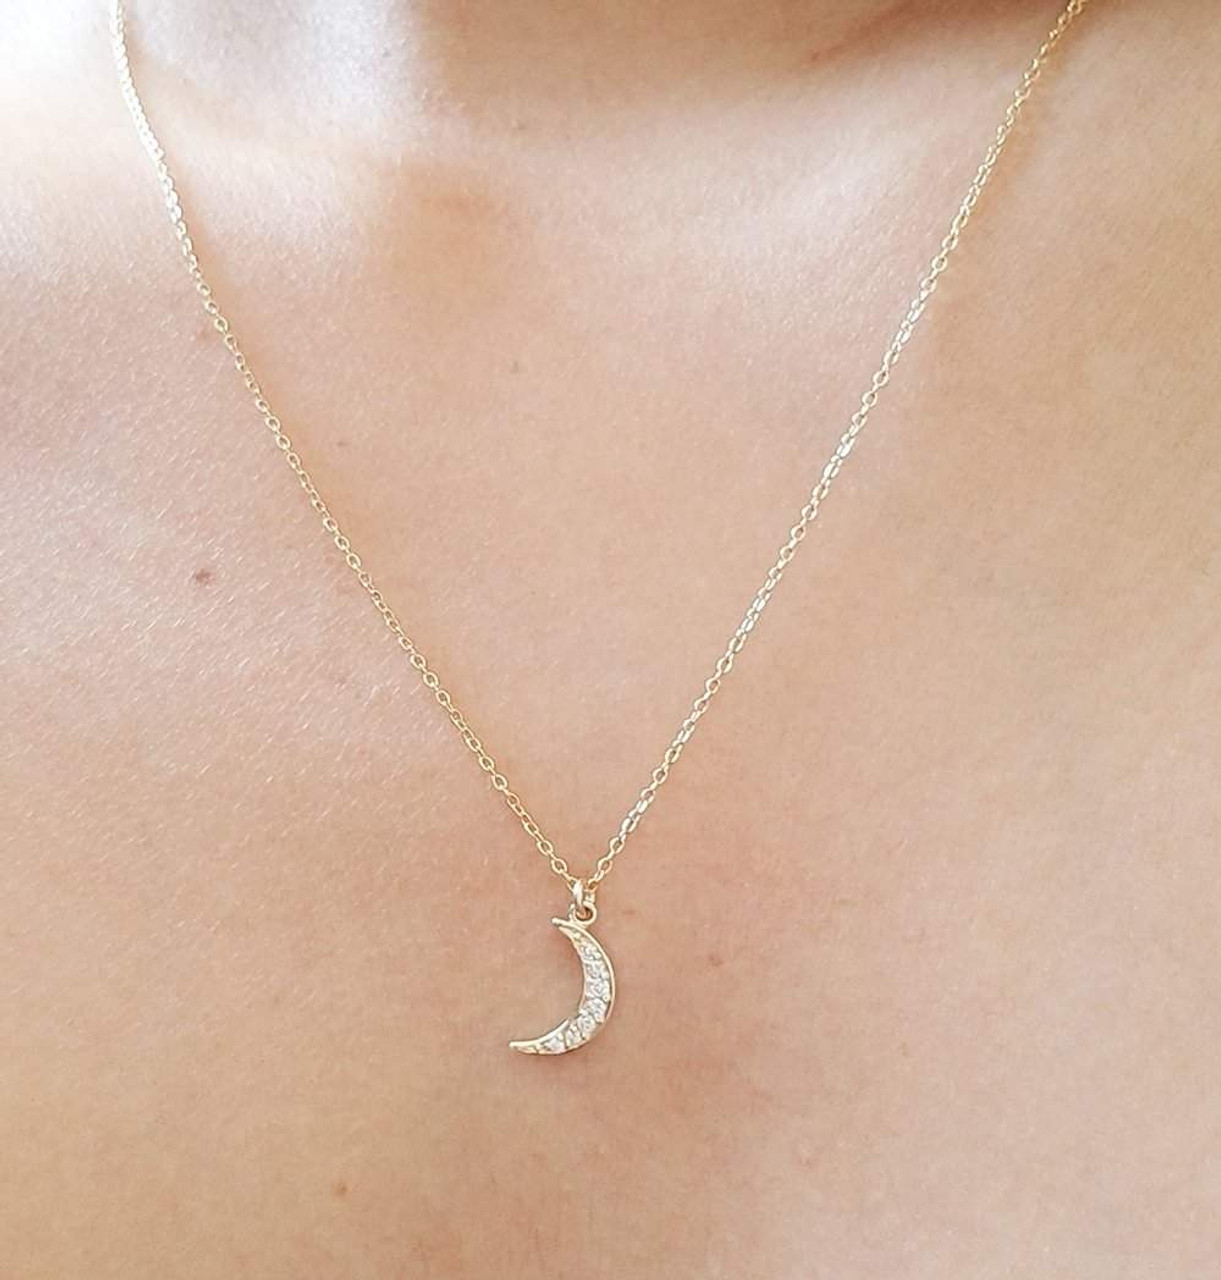 Lover's Dreaming Moon Diamond Necklace - Cross Jewelers